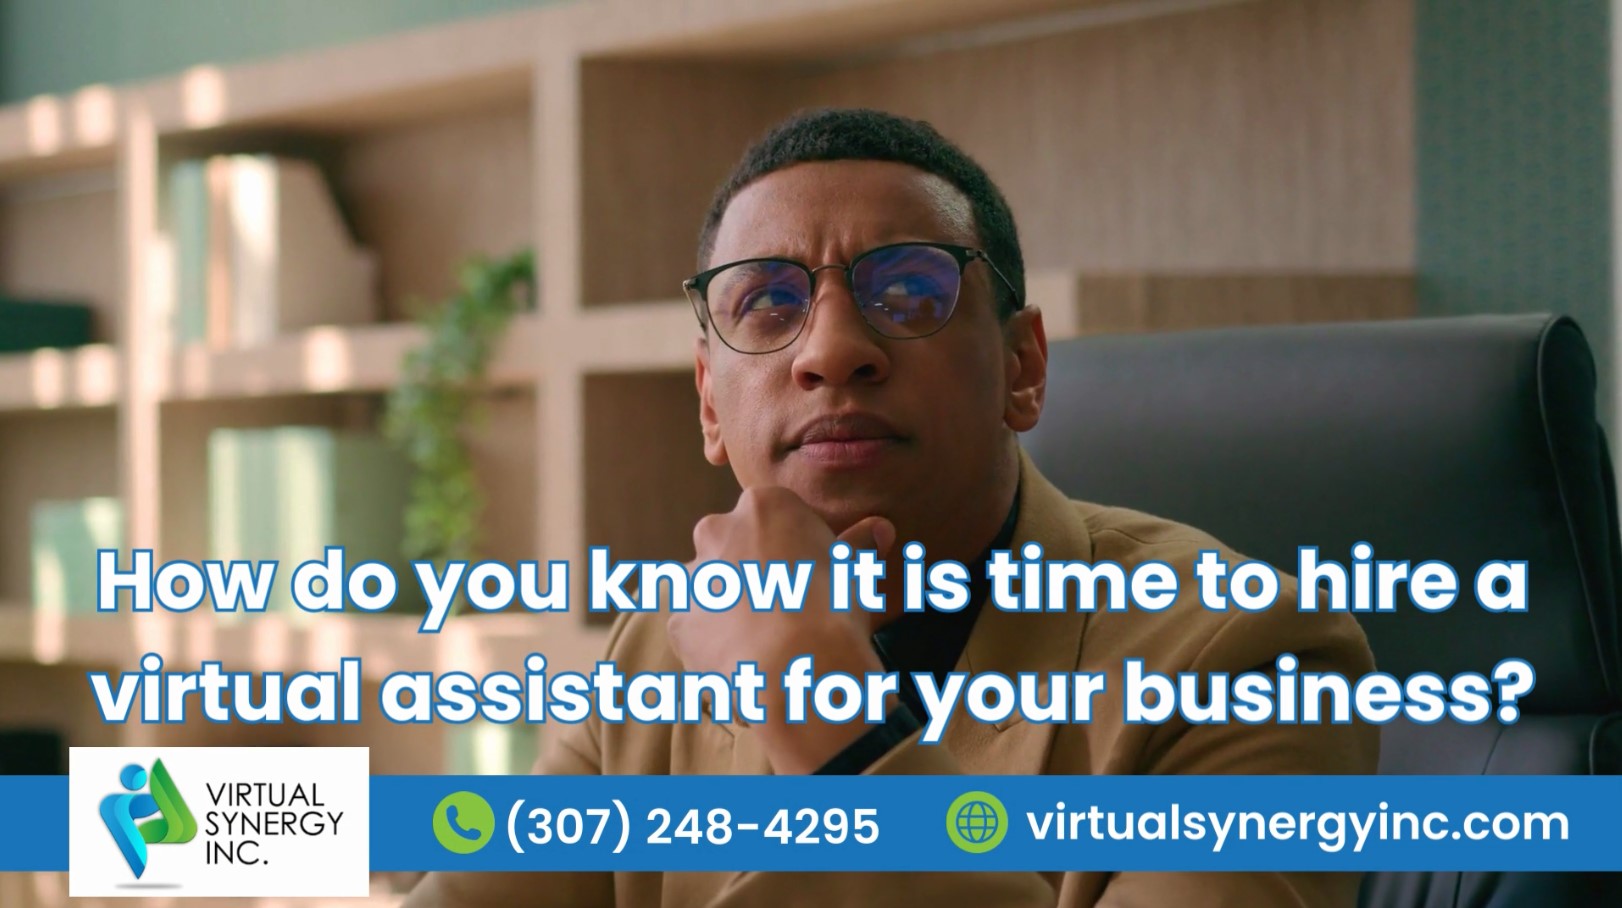 How Do You Know it is Time to Hire a Virtual Assistant for Your Business